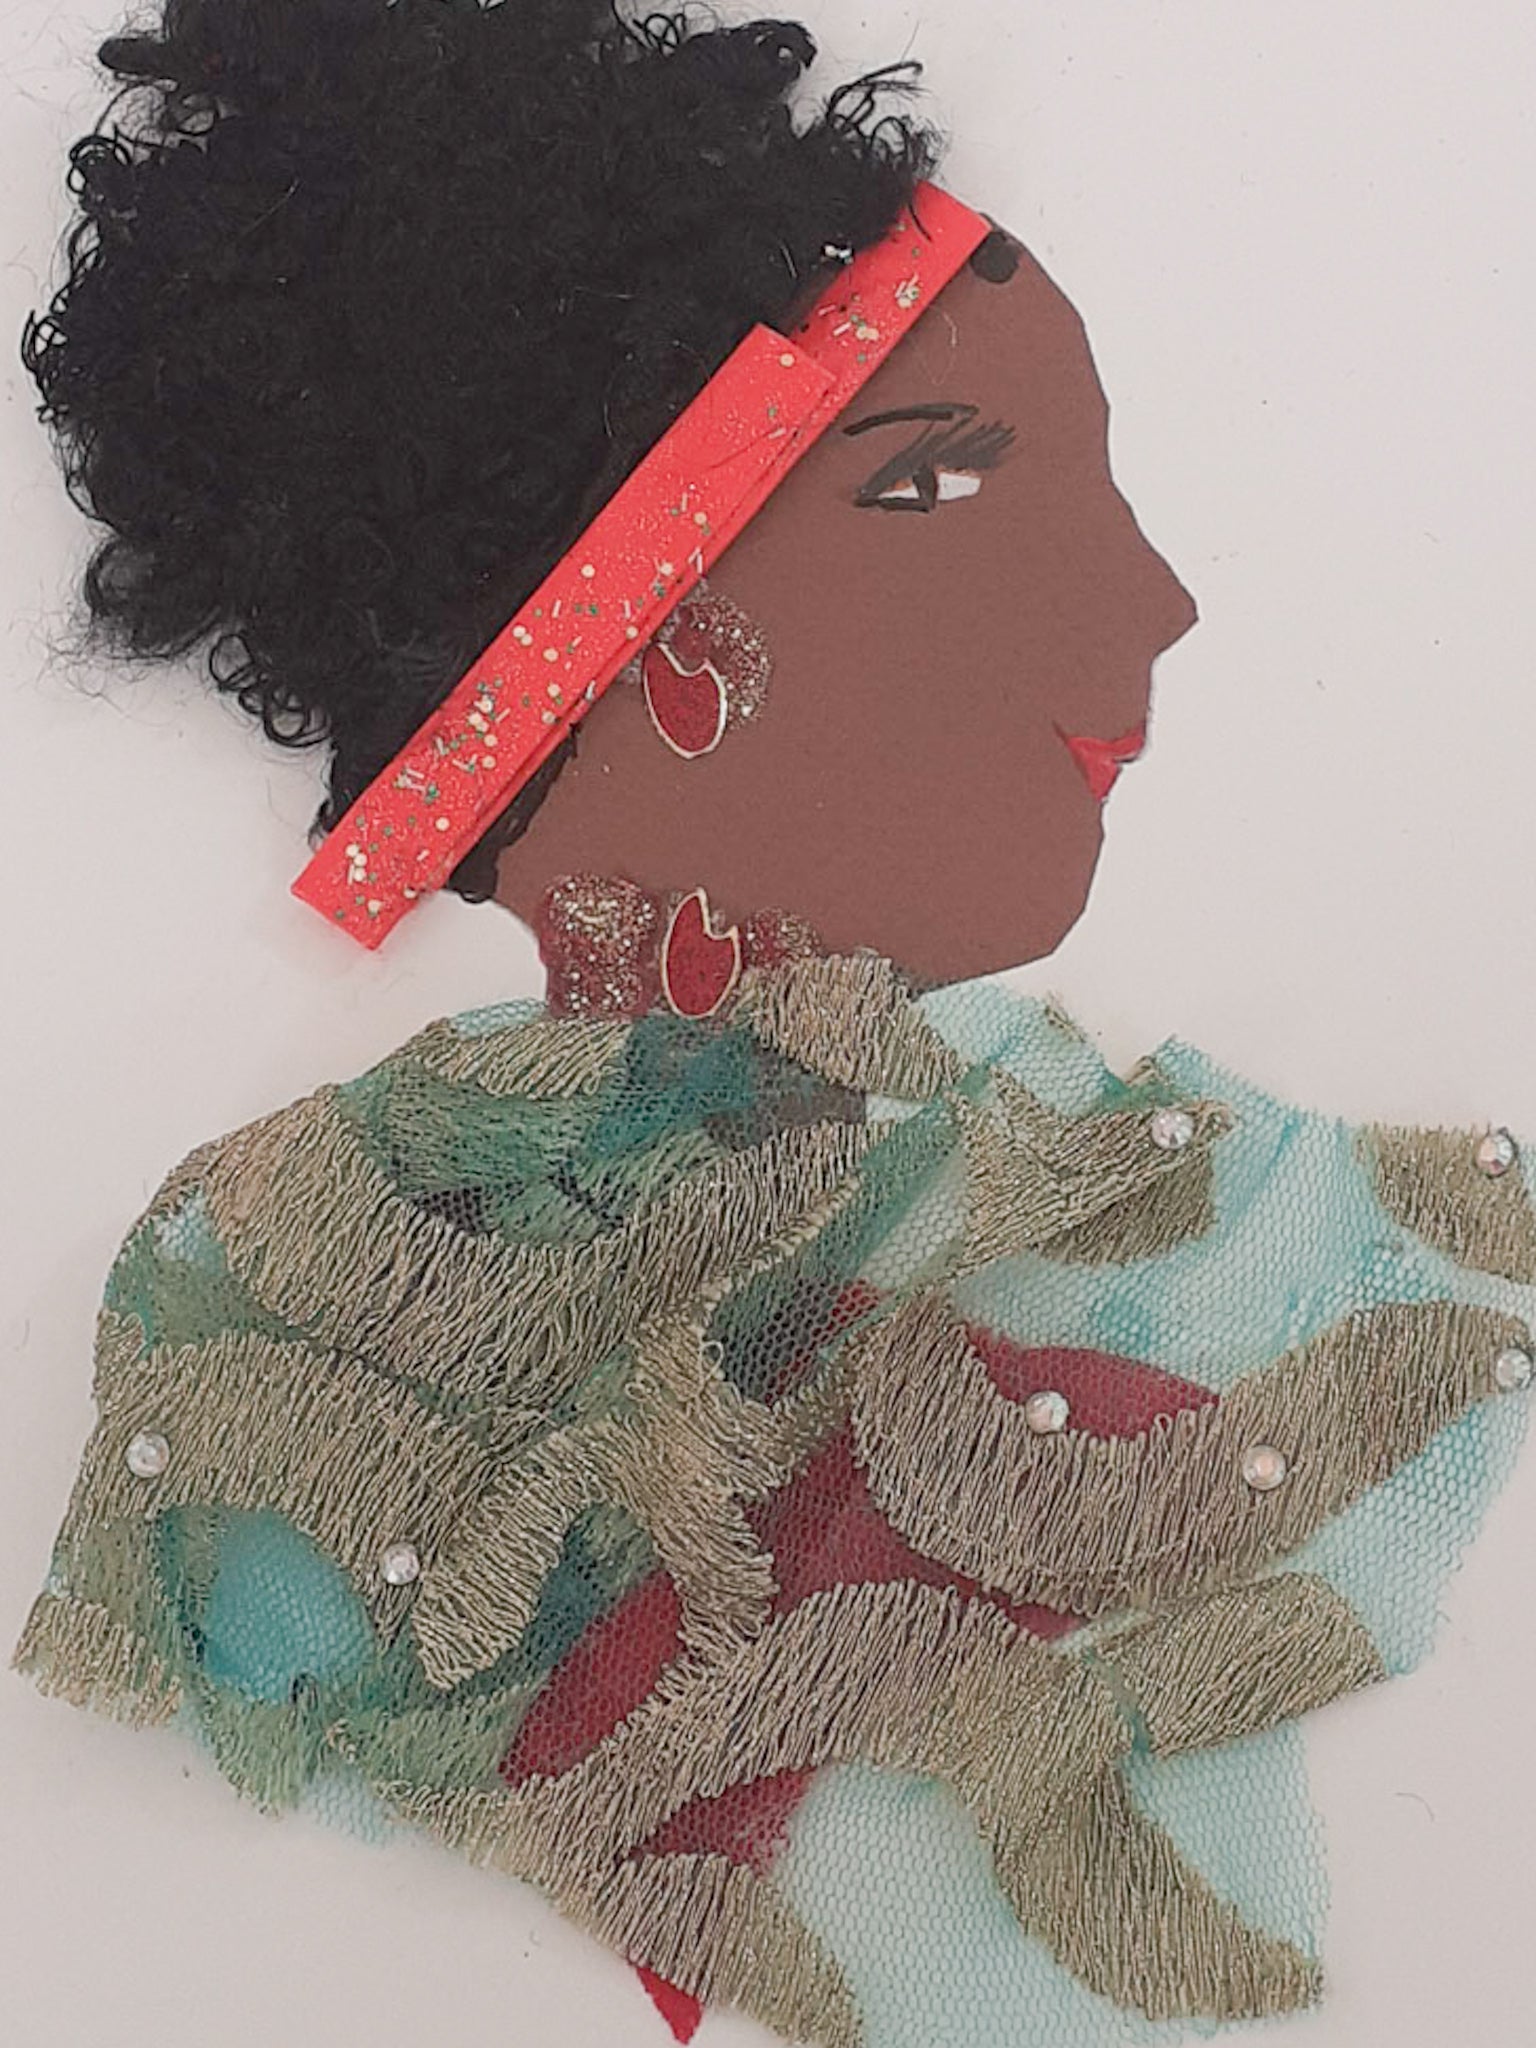 This card is of a woman named Tiffany. Tiffany wears a blue chiffon material blouse with embroidery on it. In her black curly hair, she wears a bright red headband. 